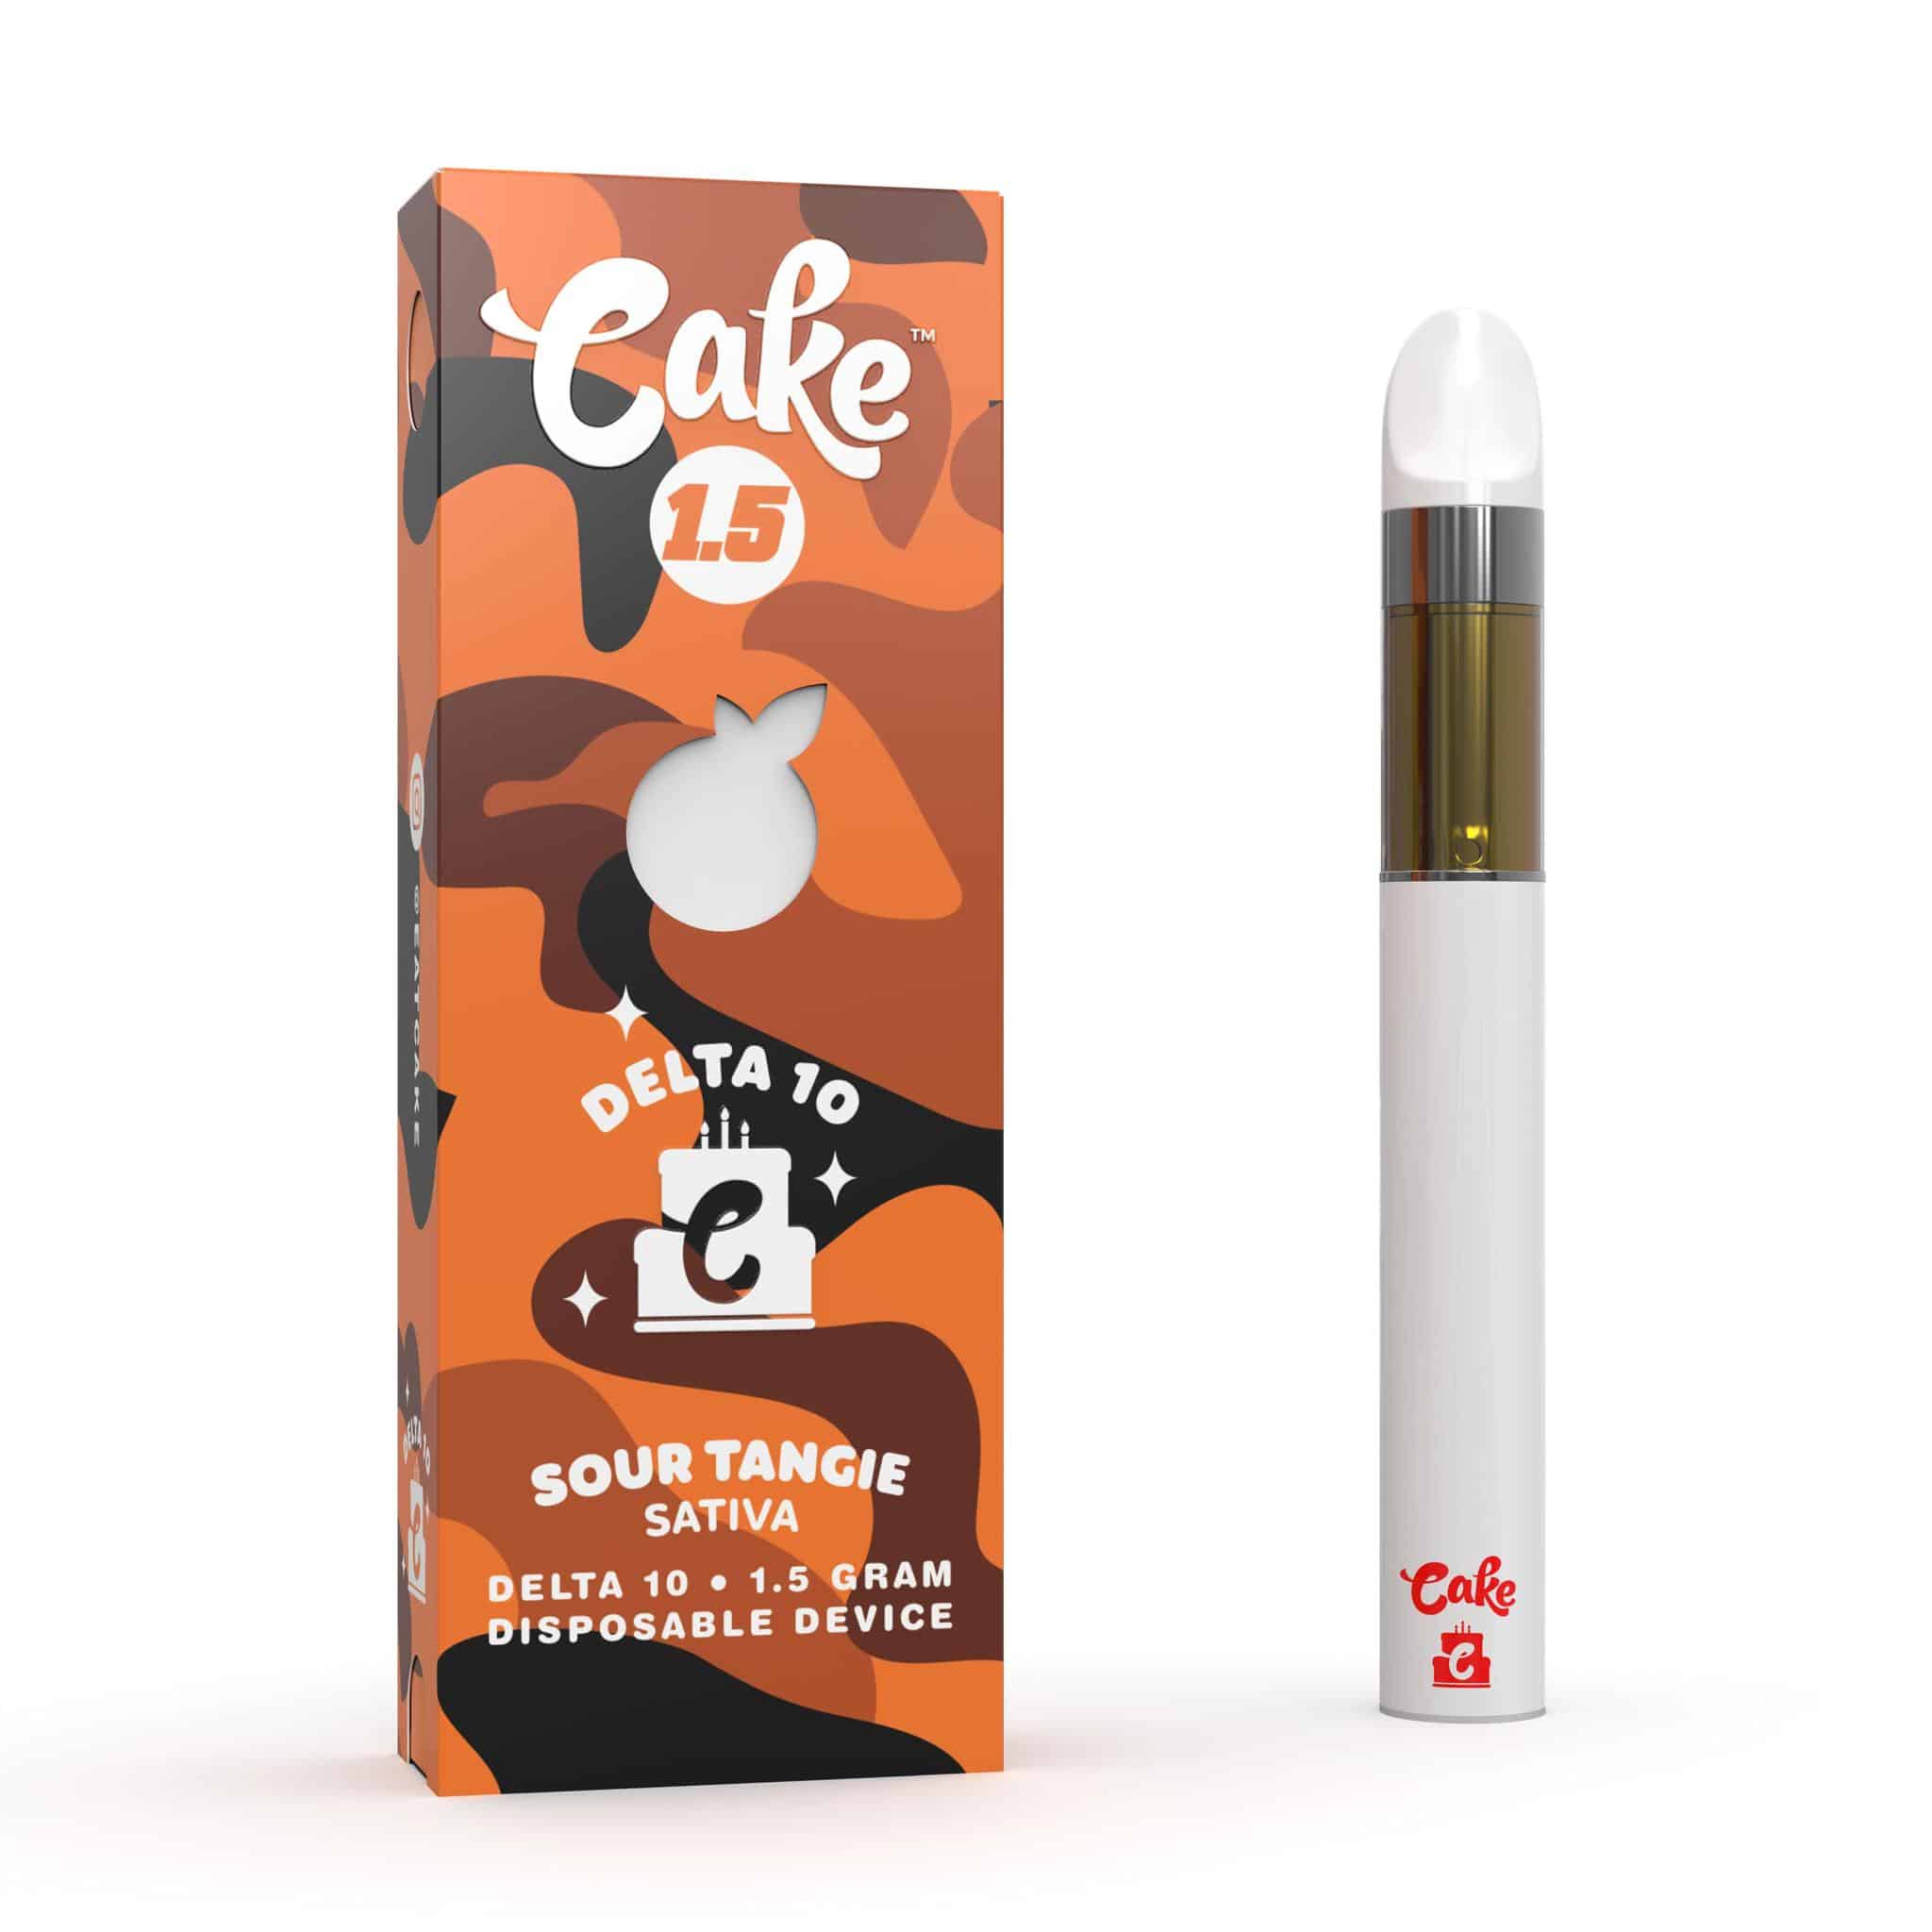 Cake Sour Tangie Delta 10 Disposable (1.5g) Best Price